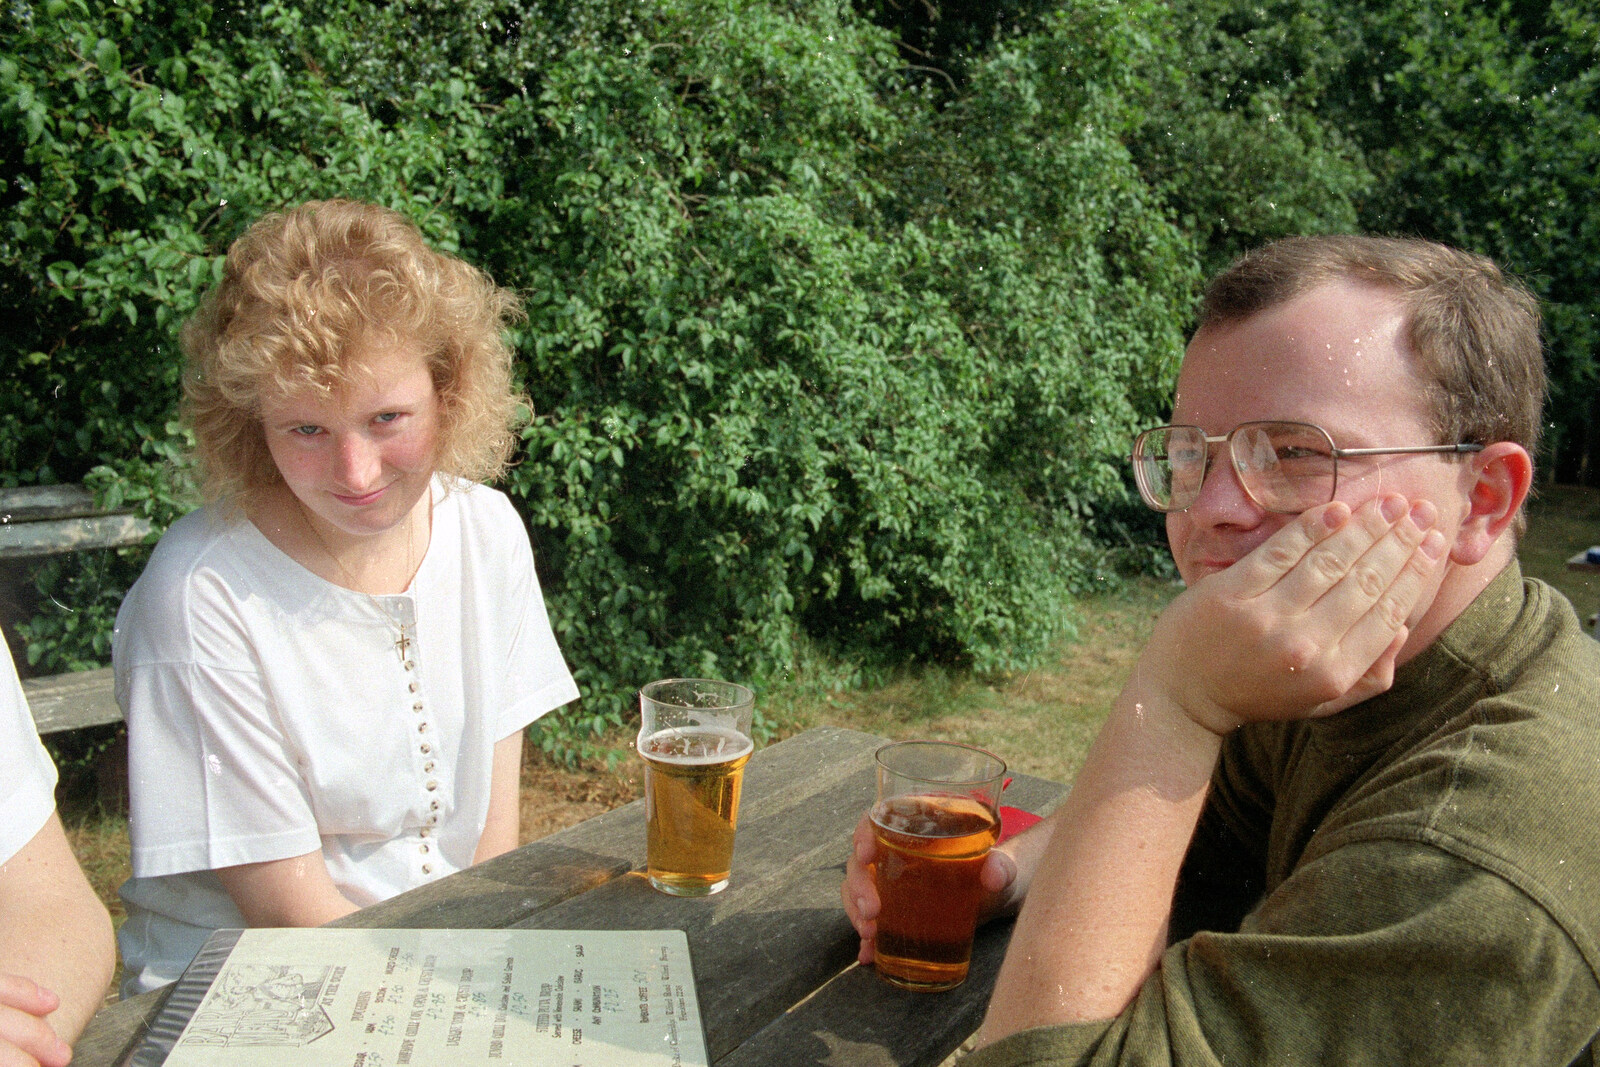 Maria and Hamish from Printec at Thwaite Buck's Head, and a Trip to Farnborough, Suffolk and Hampshire - 19th August 1991